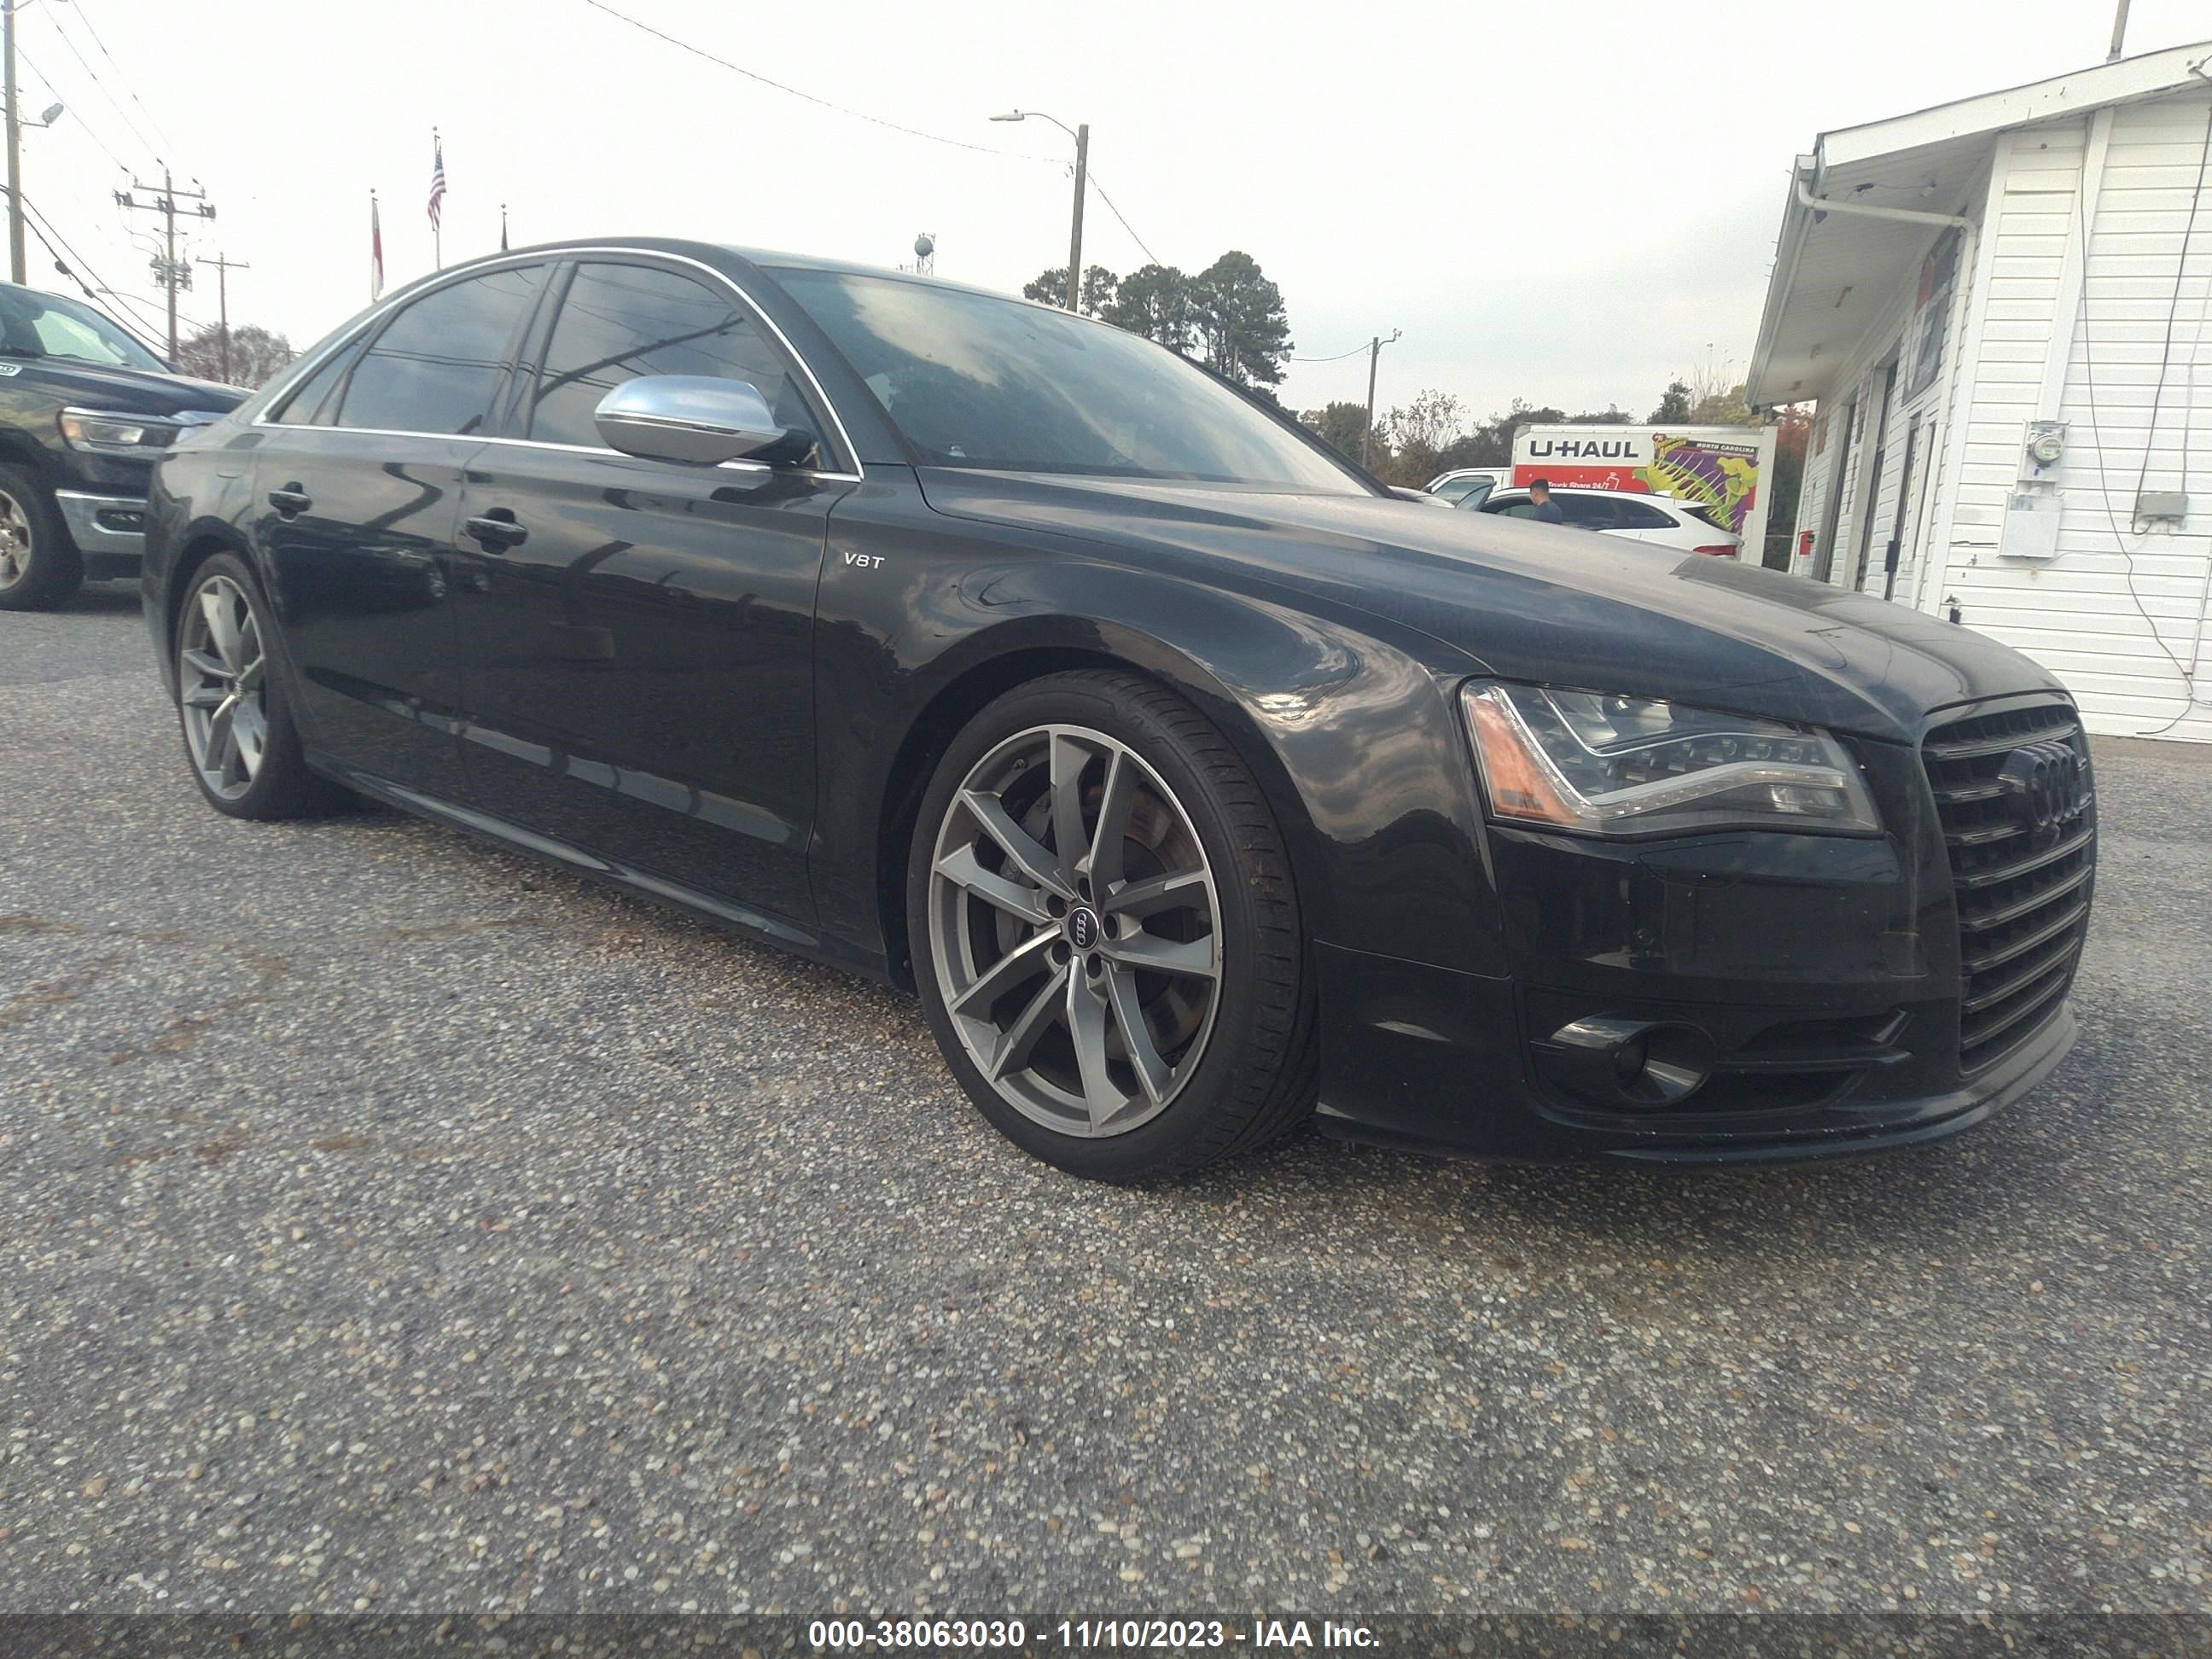 vin: WAUD2AFD5DN010735 WAUD2AFD5DN010735 2013 audi s8 4000 for Sale in 28328, 102 Underwood St, Clinton, USA